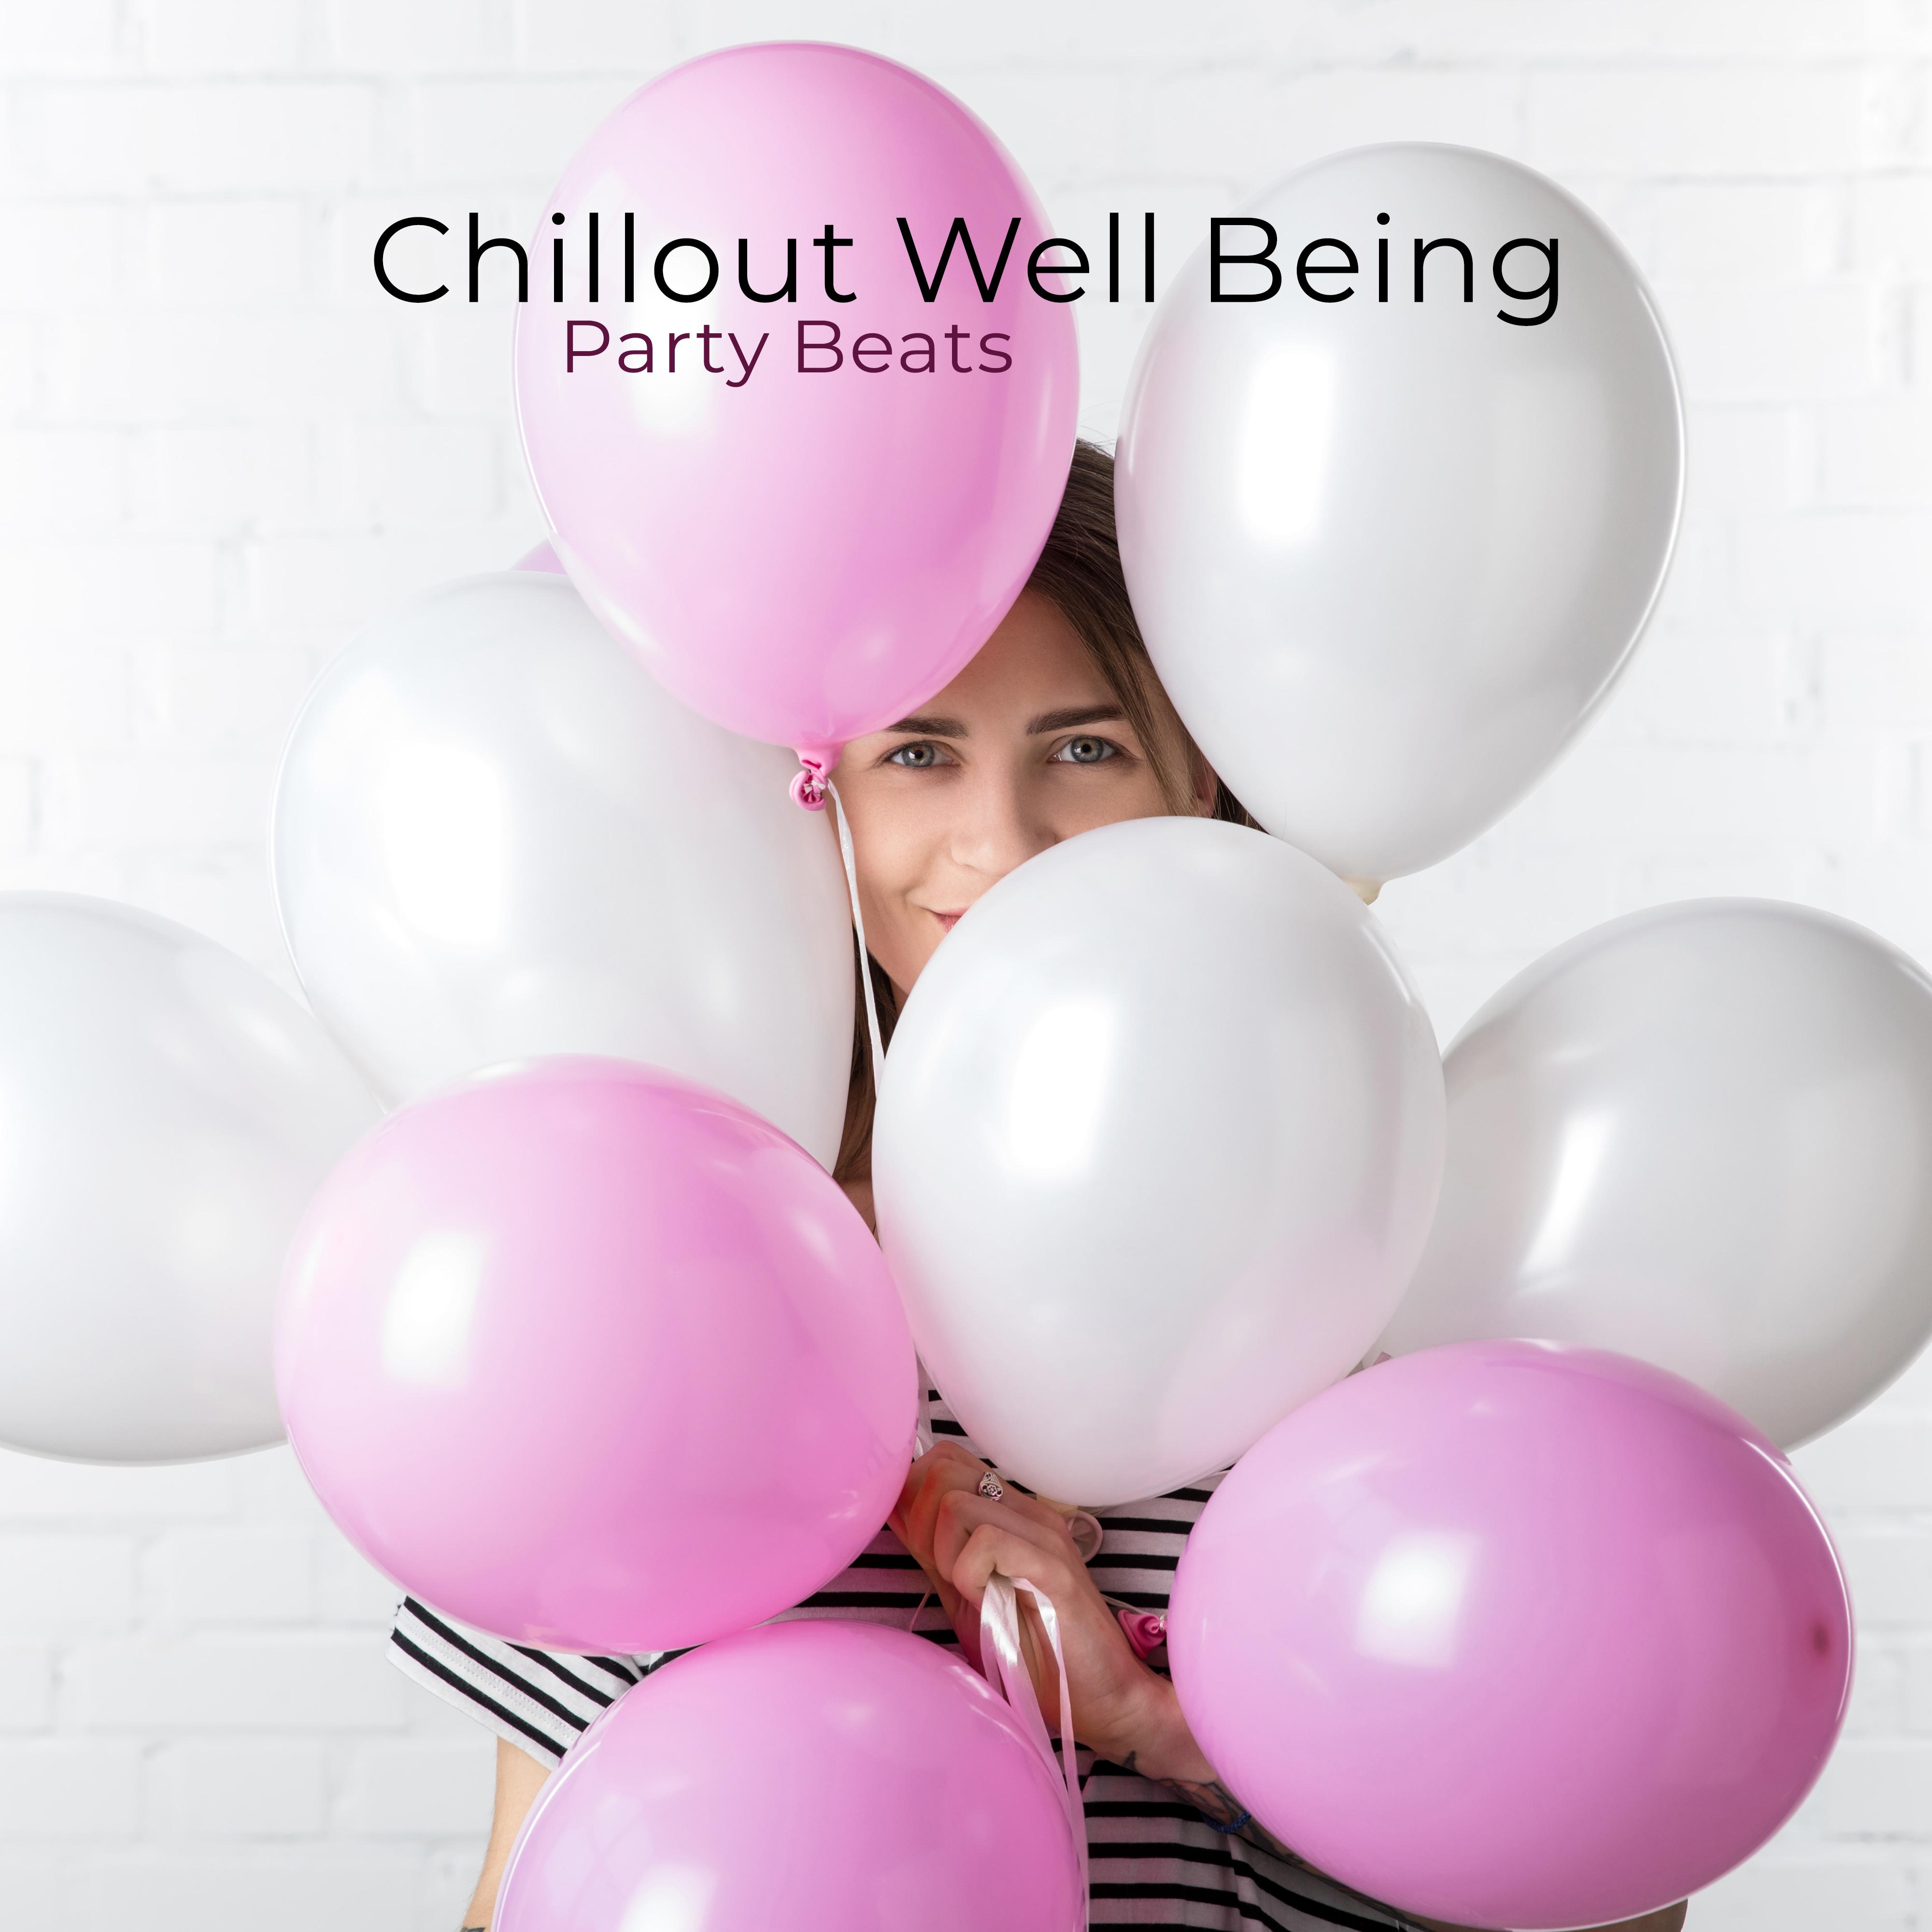 Chillout Well Being Party Beats: 2019 Chill Out EDM Slow Music, Top Dancing Electronic Songs, Energetic Vibes, Low BPM Tracks